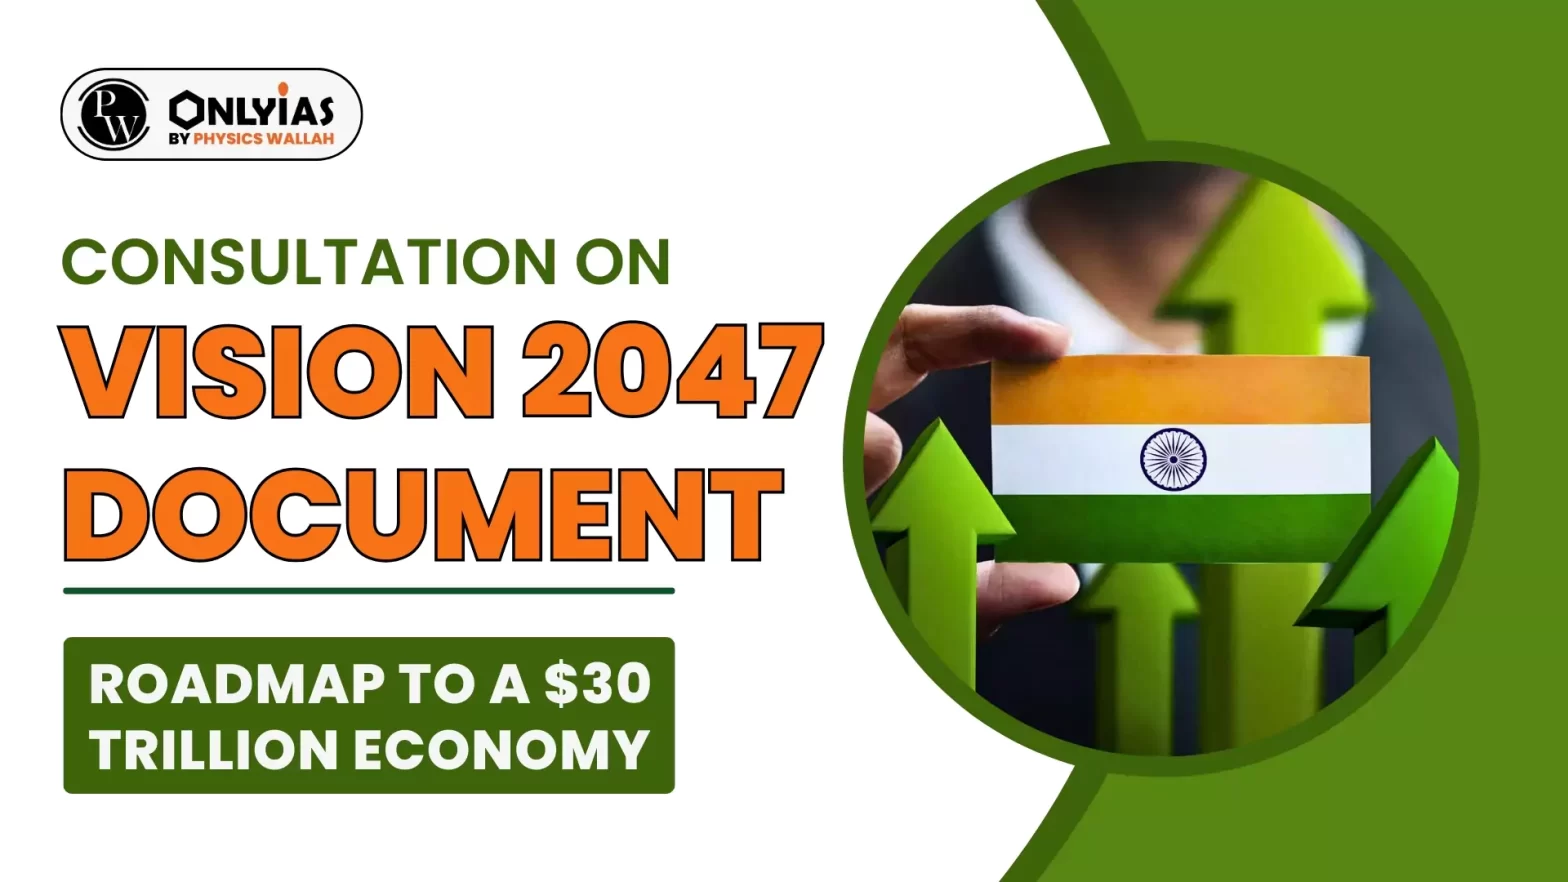 Consultation On Vision 2047 Document: Roadmap to a $30 Trillion Economy